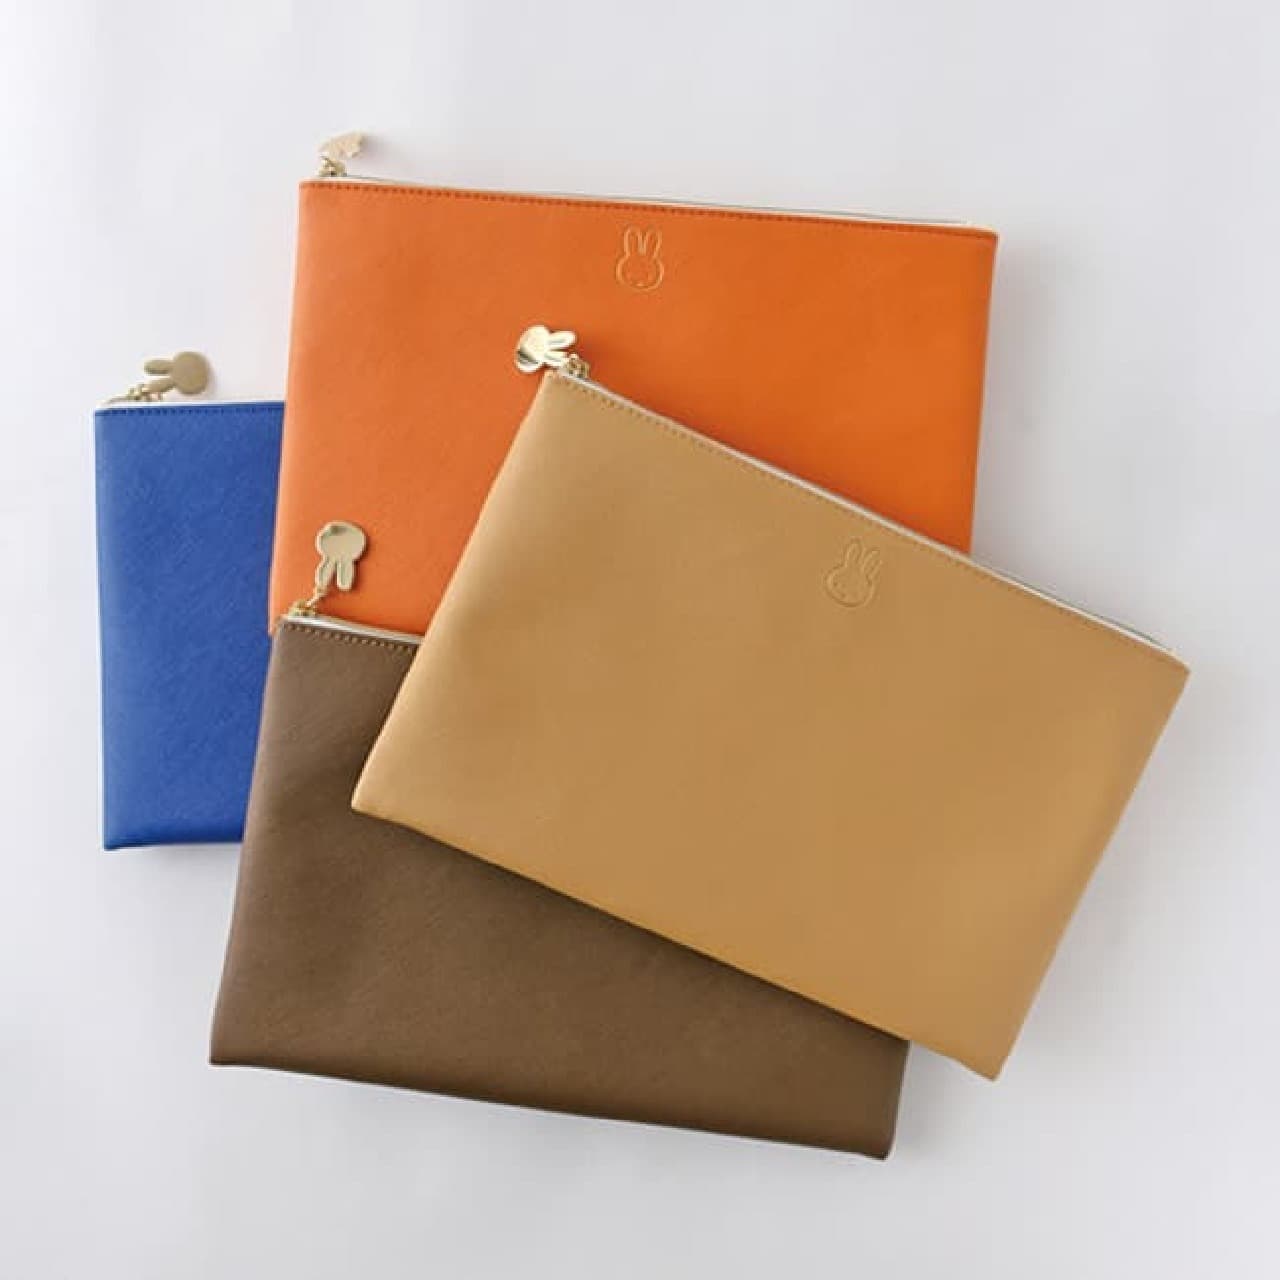 Miffy's new stationery at Vile Van -- cute notebooks, letter sets, zipper bags, etc.